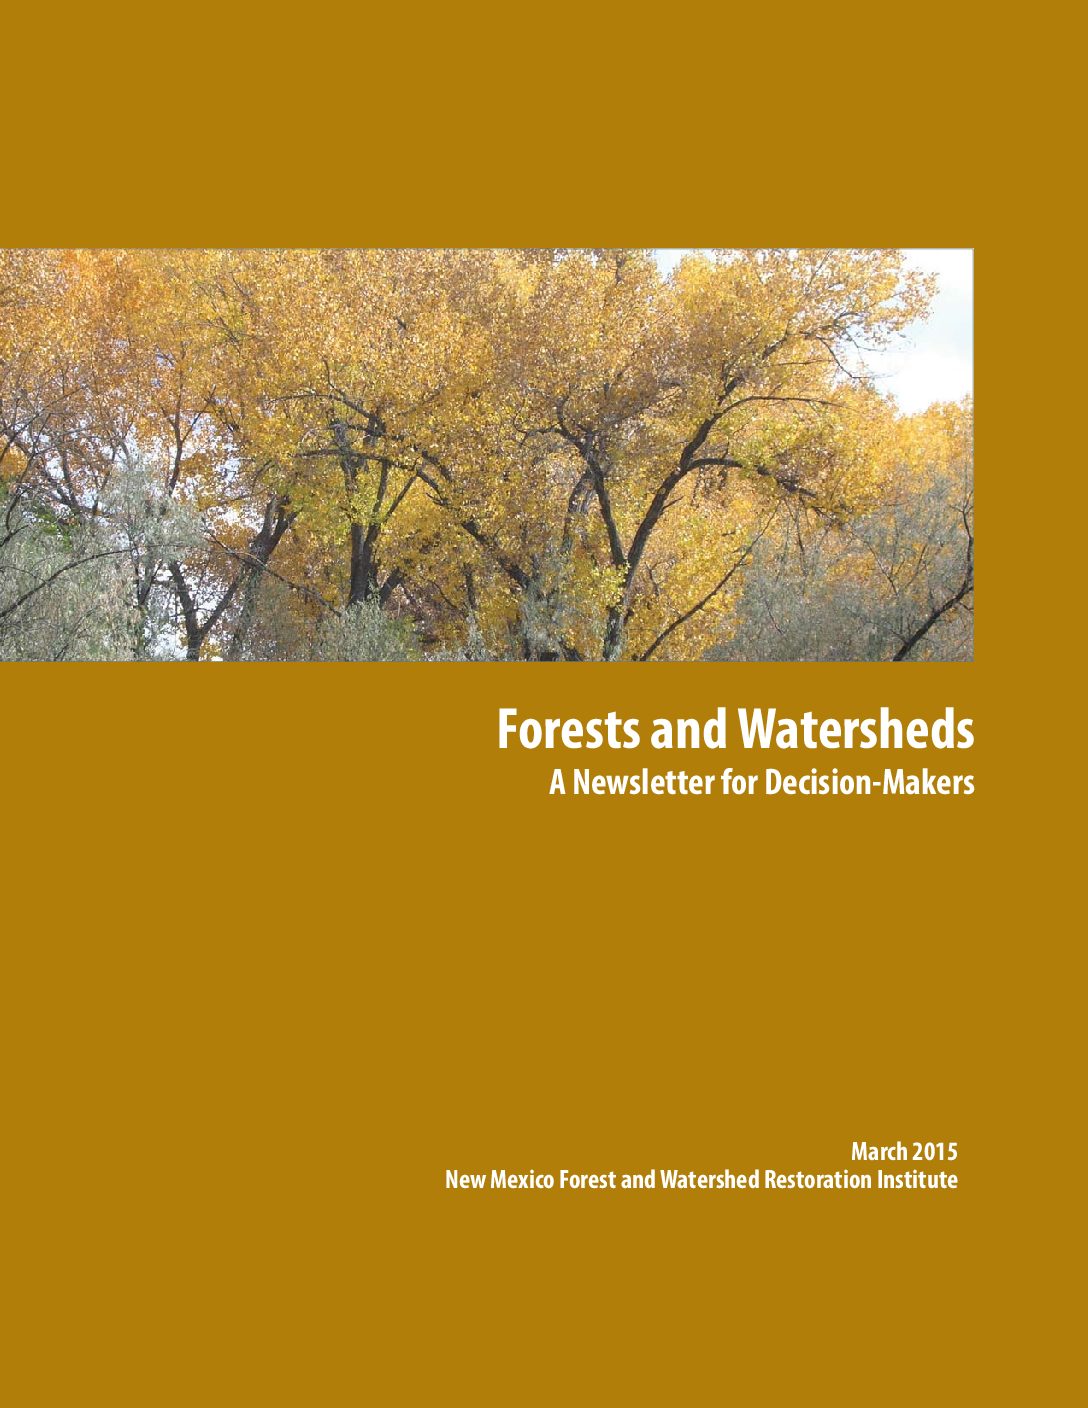 NMFWRI Forests and Watersheds Newsletter 2015